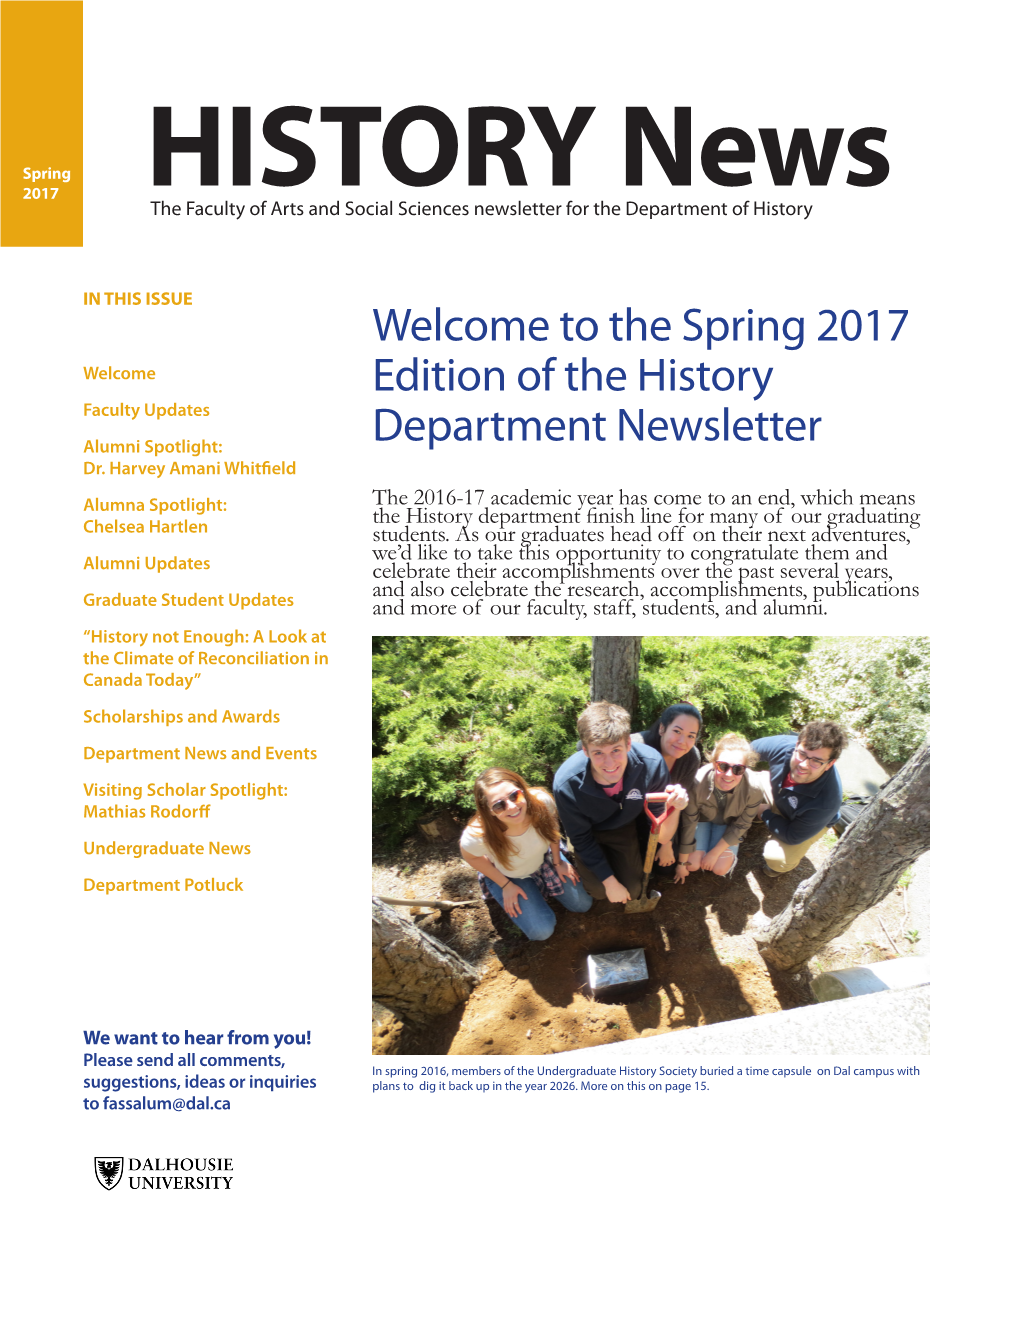 Welcome to the Spring 2017 Edition of the History Department Newsletter